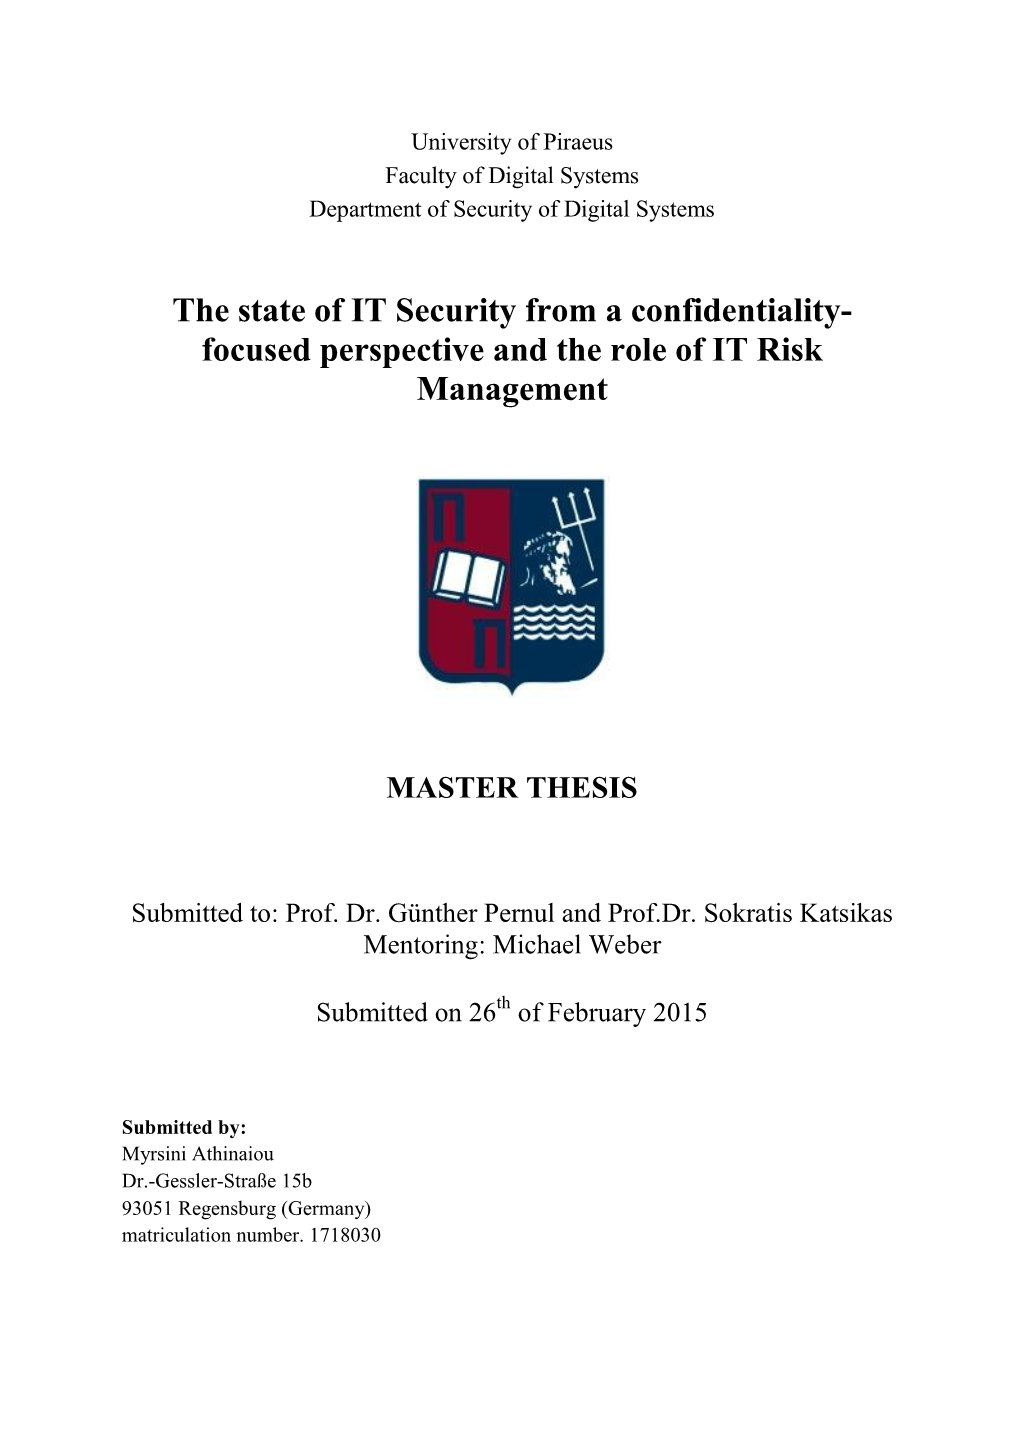 The State of IT Security from a Confidentiality- Focused Perspective and the Role of IT Risk Management